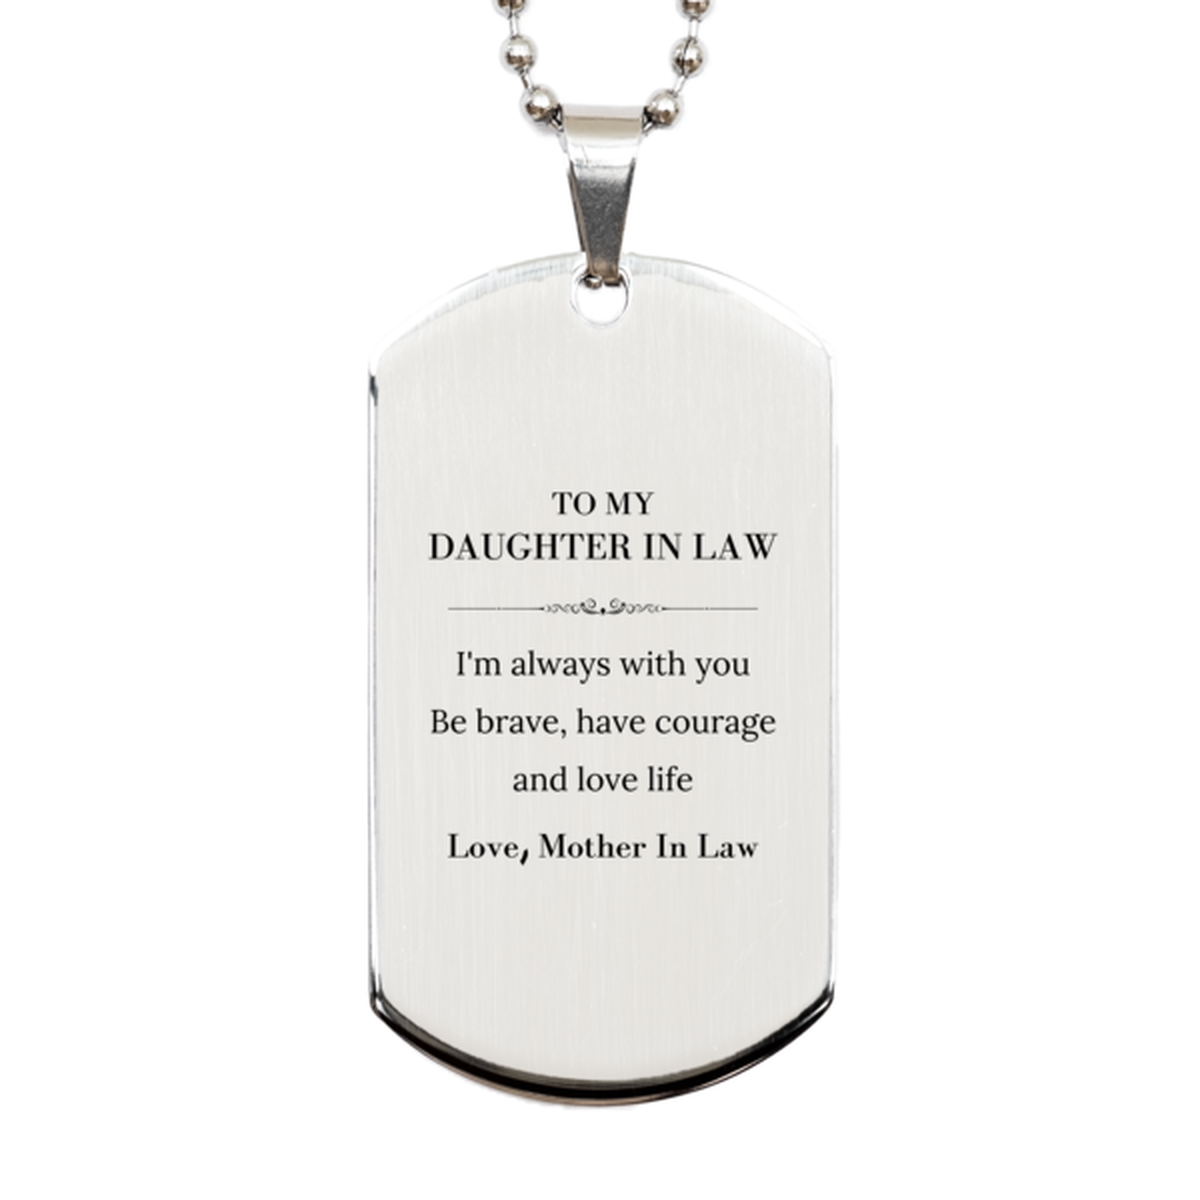 To My Daughter In Law Gifts from Mother In Law, Unique Silver Dog Tag Inspirational Christmas Birthday Graduation Gifts for Daughter In Law I'm always with you. Be brave, have courage and love life. Love, Mother In Law